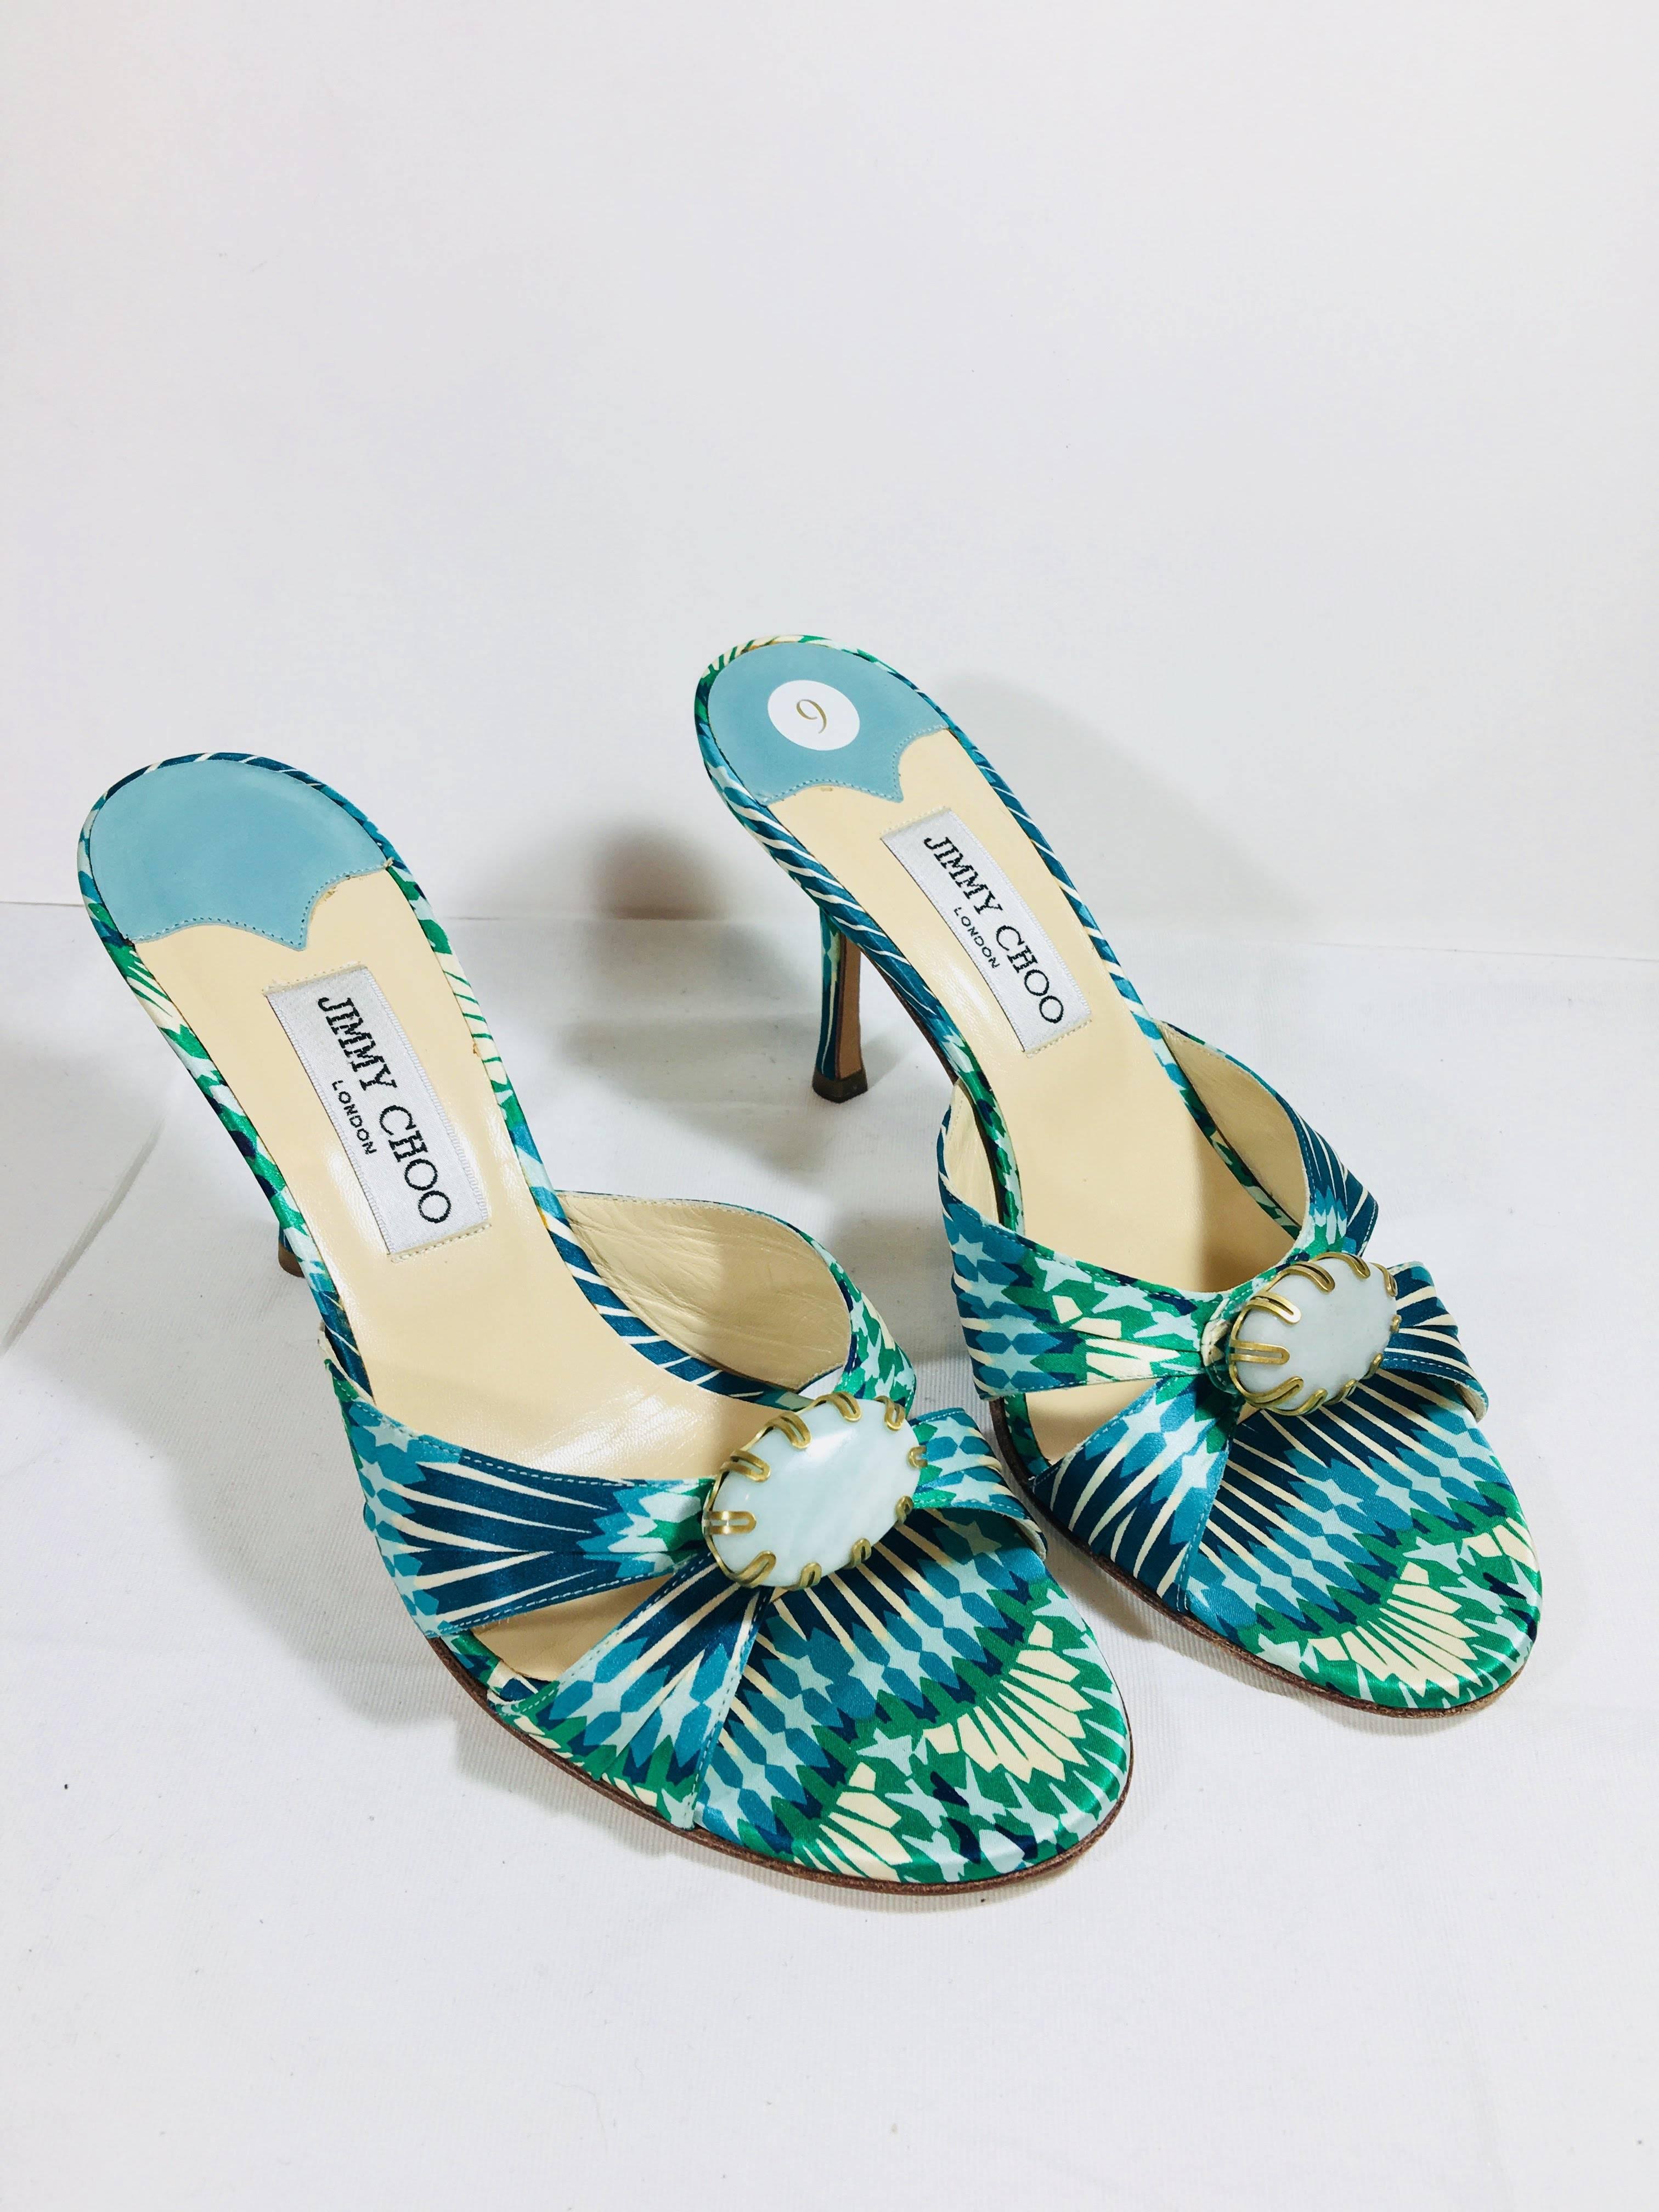 Jimmy Choo Satin Green Multi Colored Printed Open Toe Mule Pumps with Turquoise Stone at Toe.